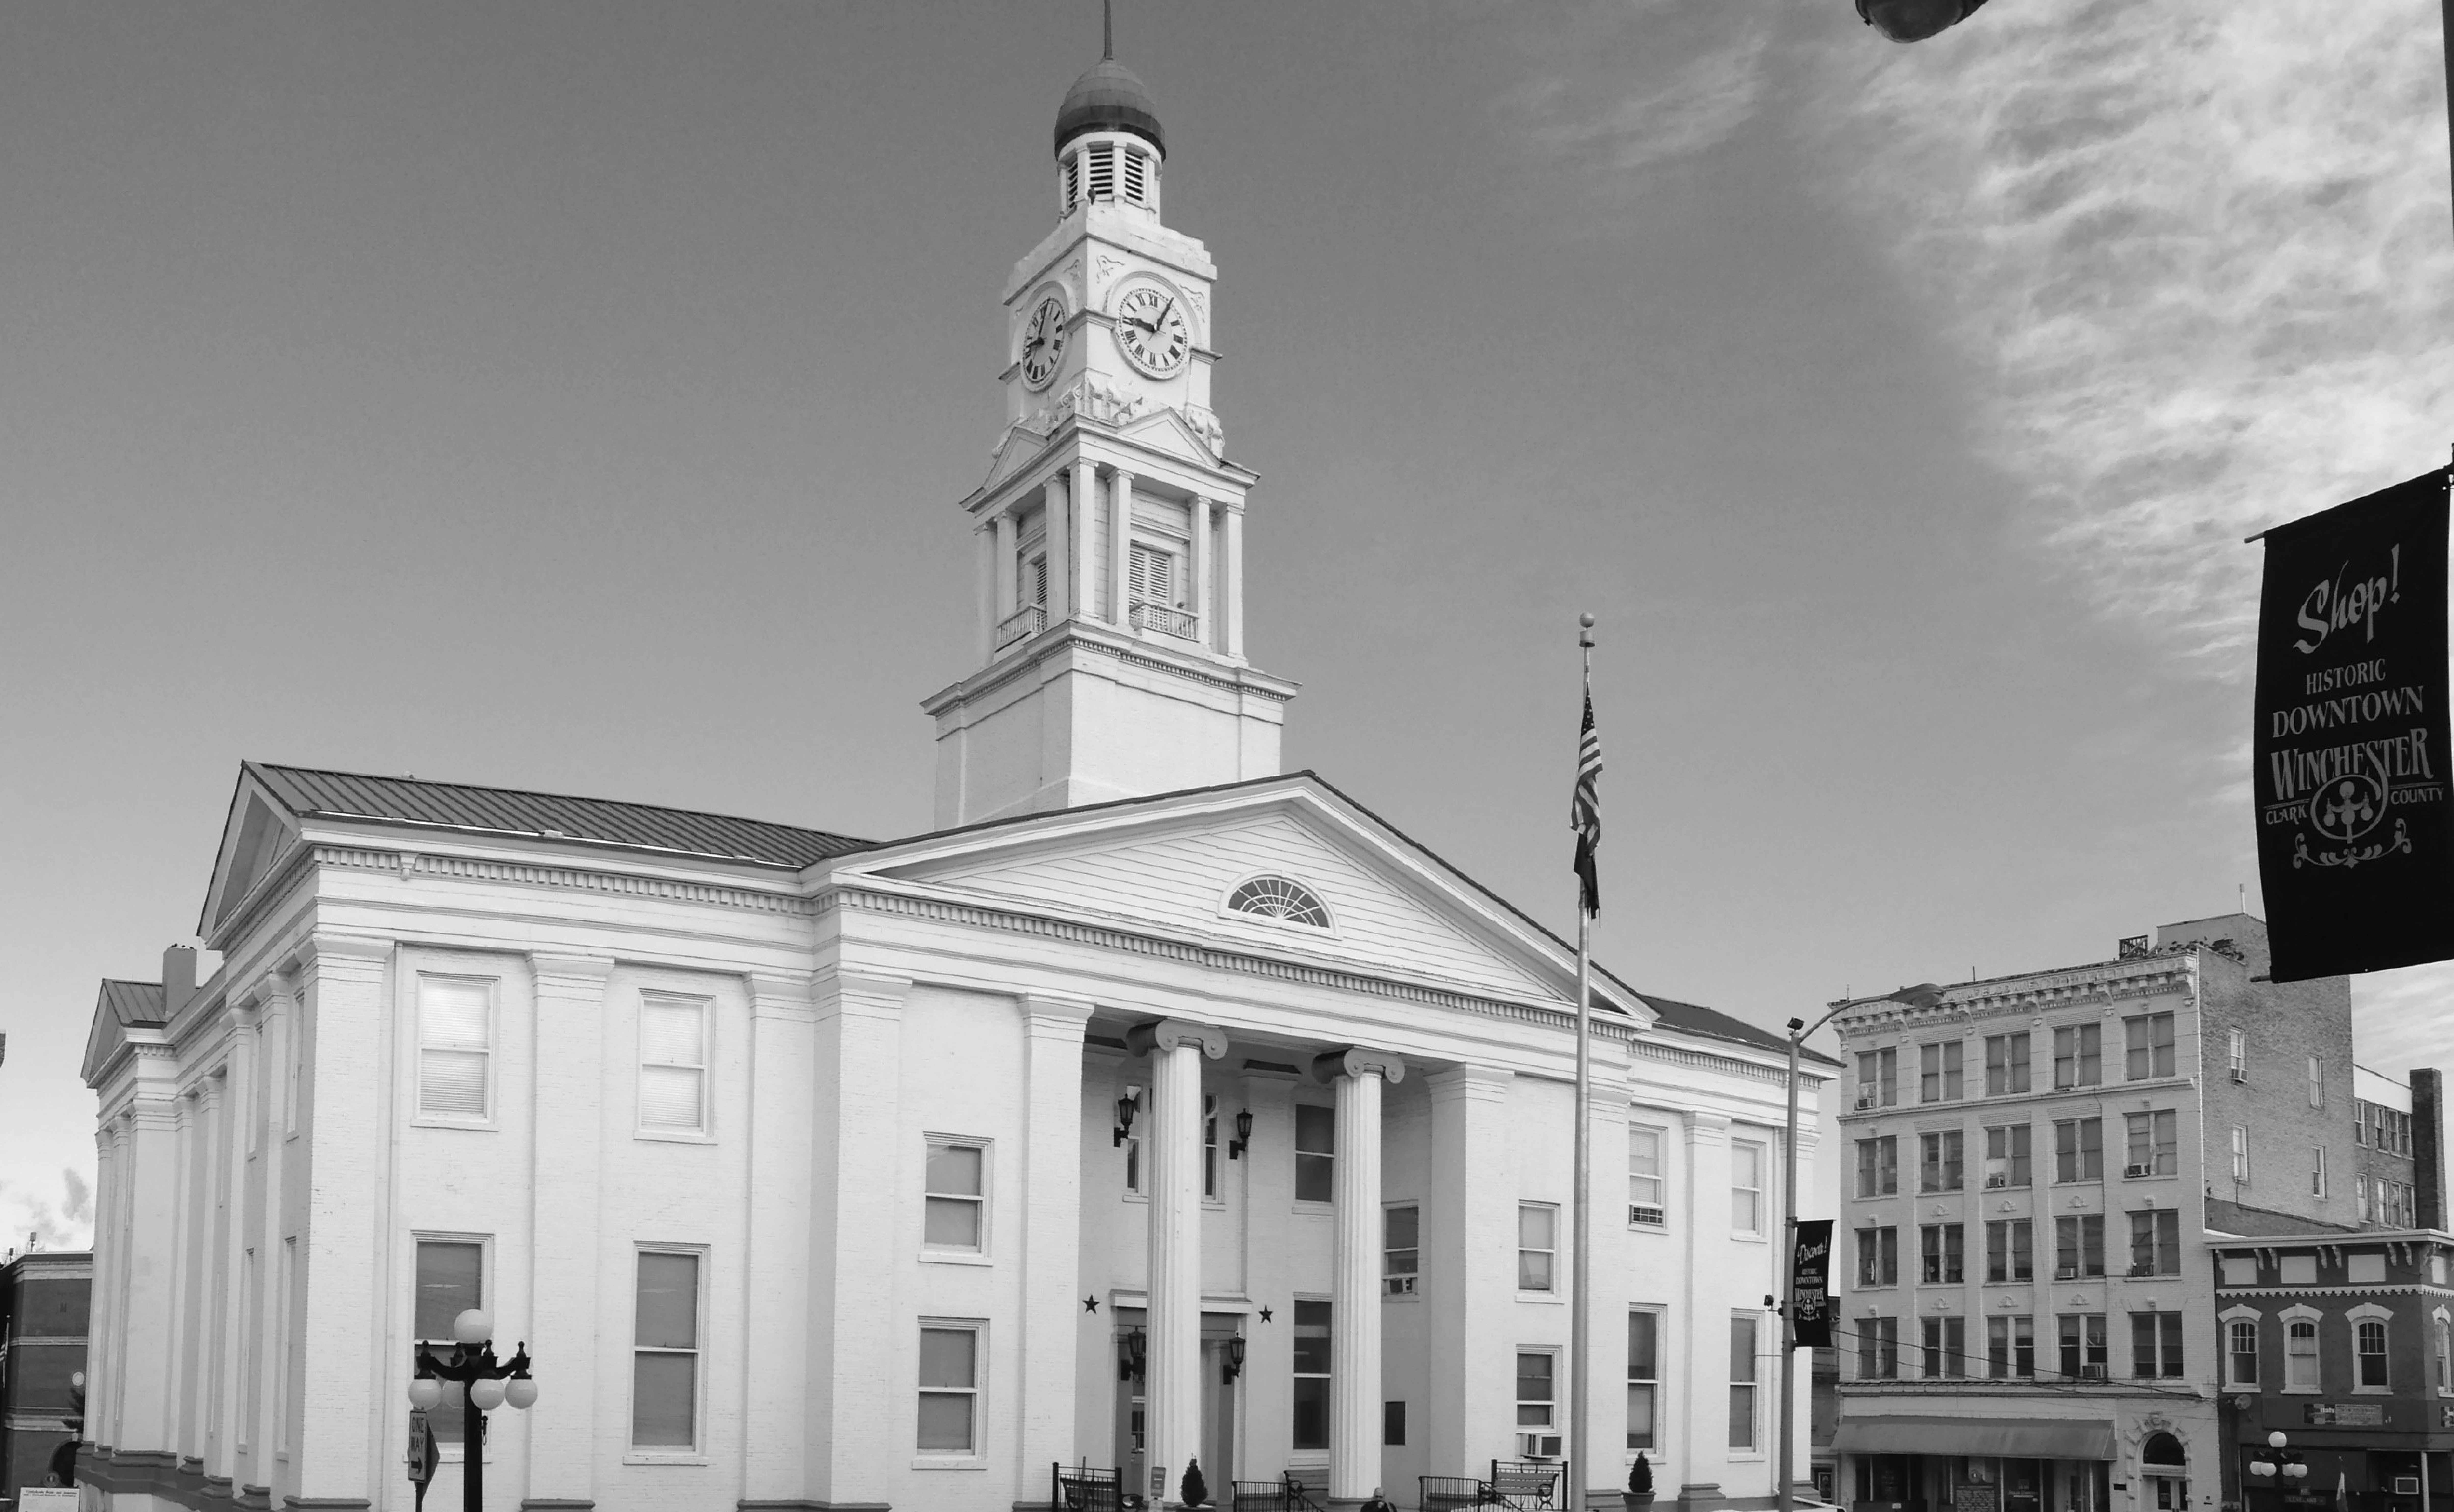 The Clark County courthouse located in Winchester, Kentucky.